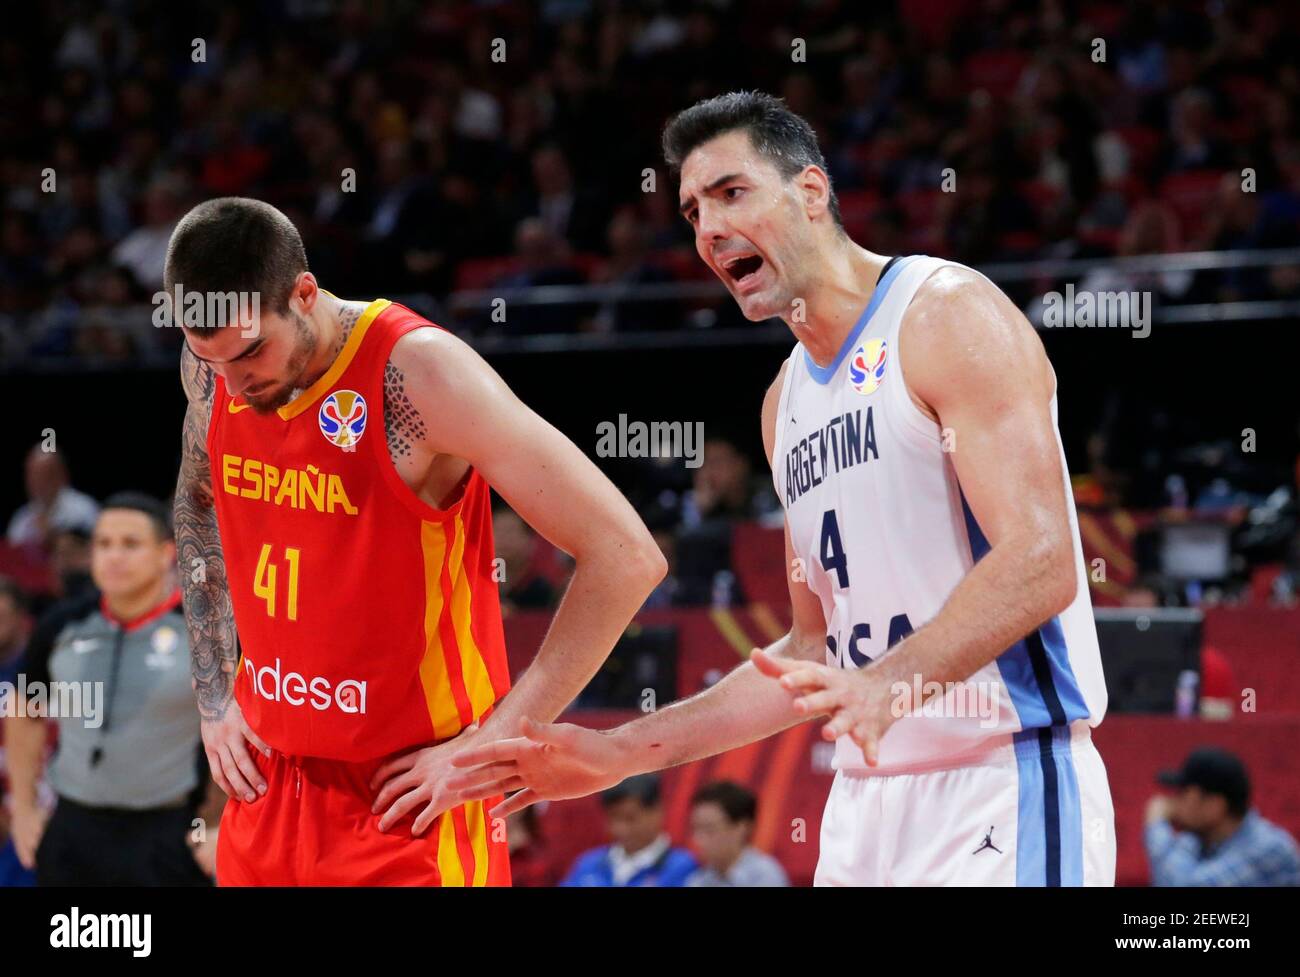 Basketball - FIBA World Cup - Final - Argentina v Spain - Wukesong Sport Arena, Beijing, China - September 15, 2019   Argentina's Luis Scola and Spain's Juancho Hernangomez react during the match REUTERS/Jason Lee Stock Photo